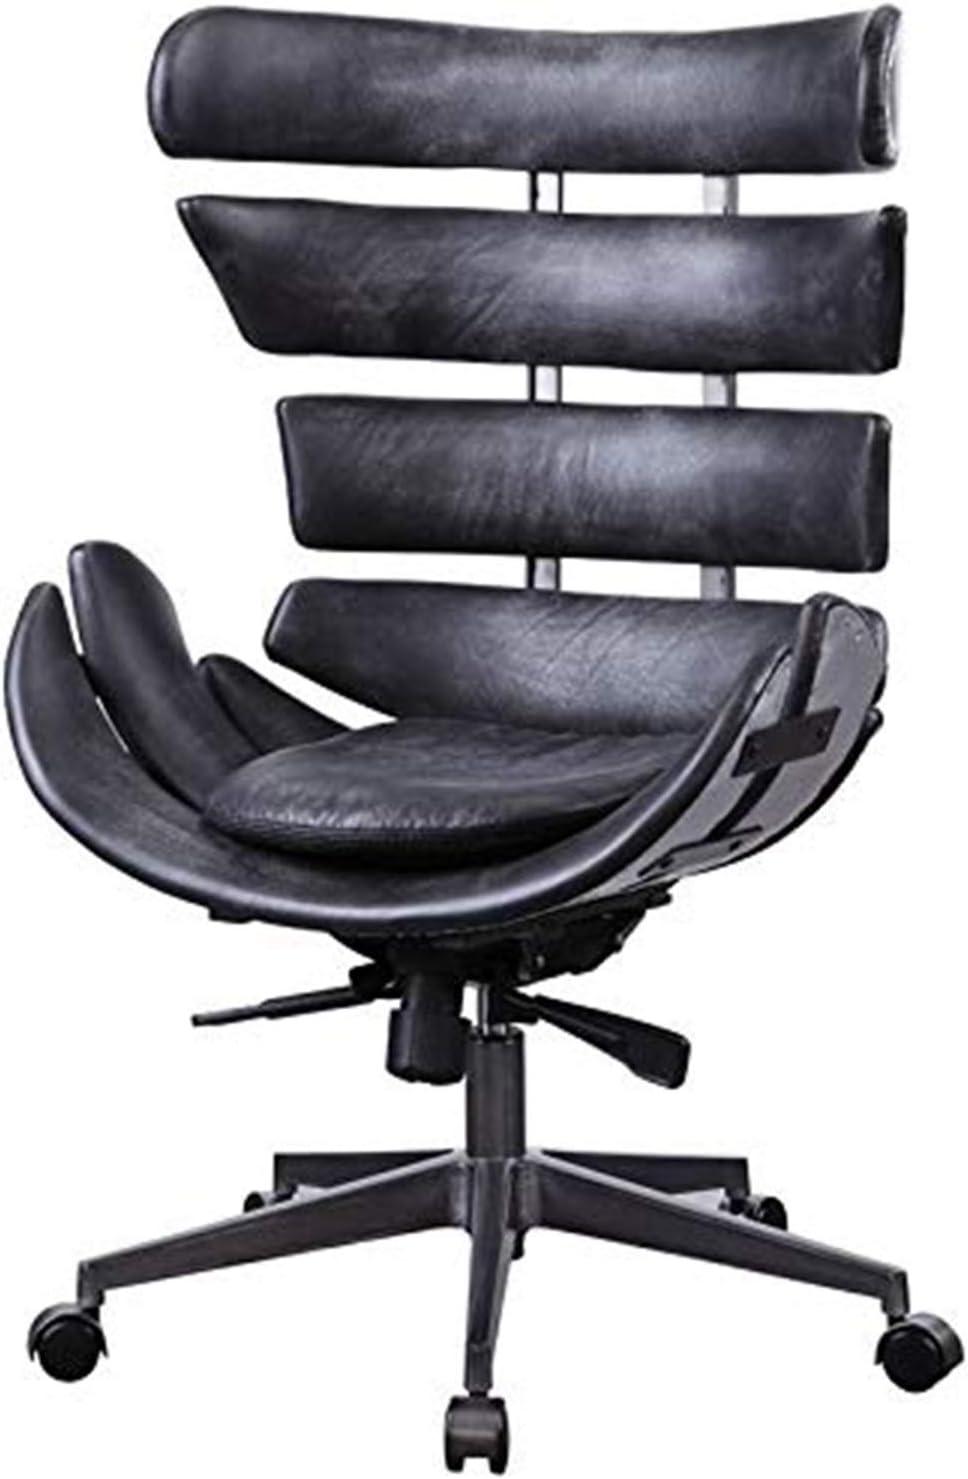 Vintage Black Leather High-Back Swivel Executive Chair